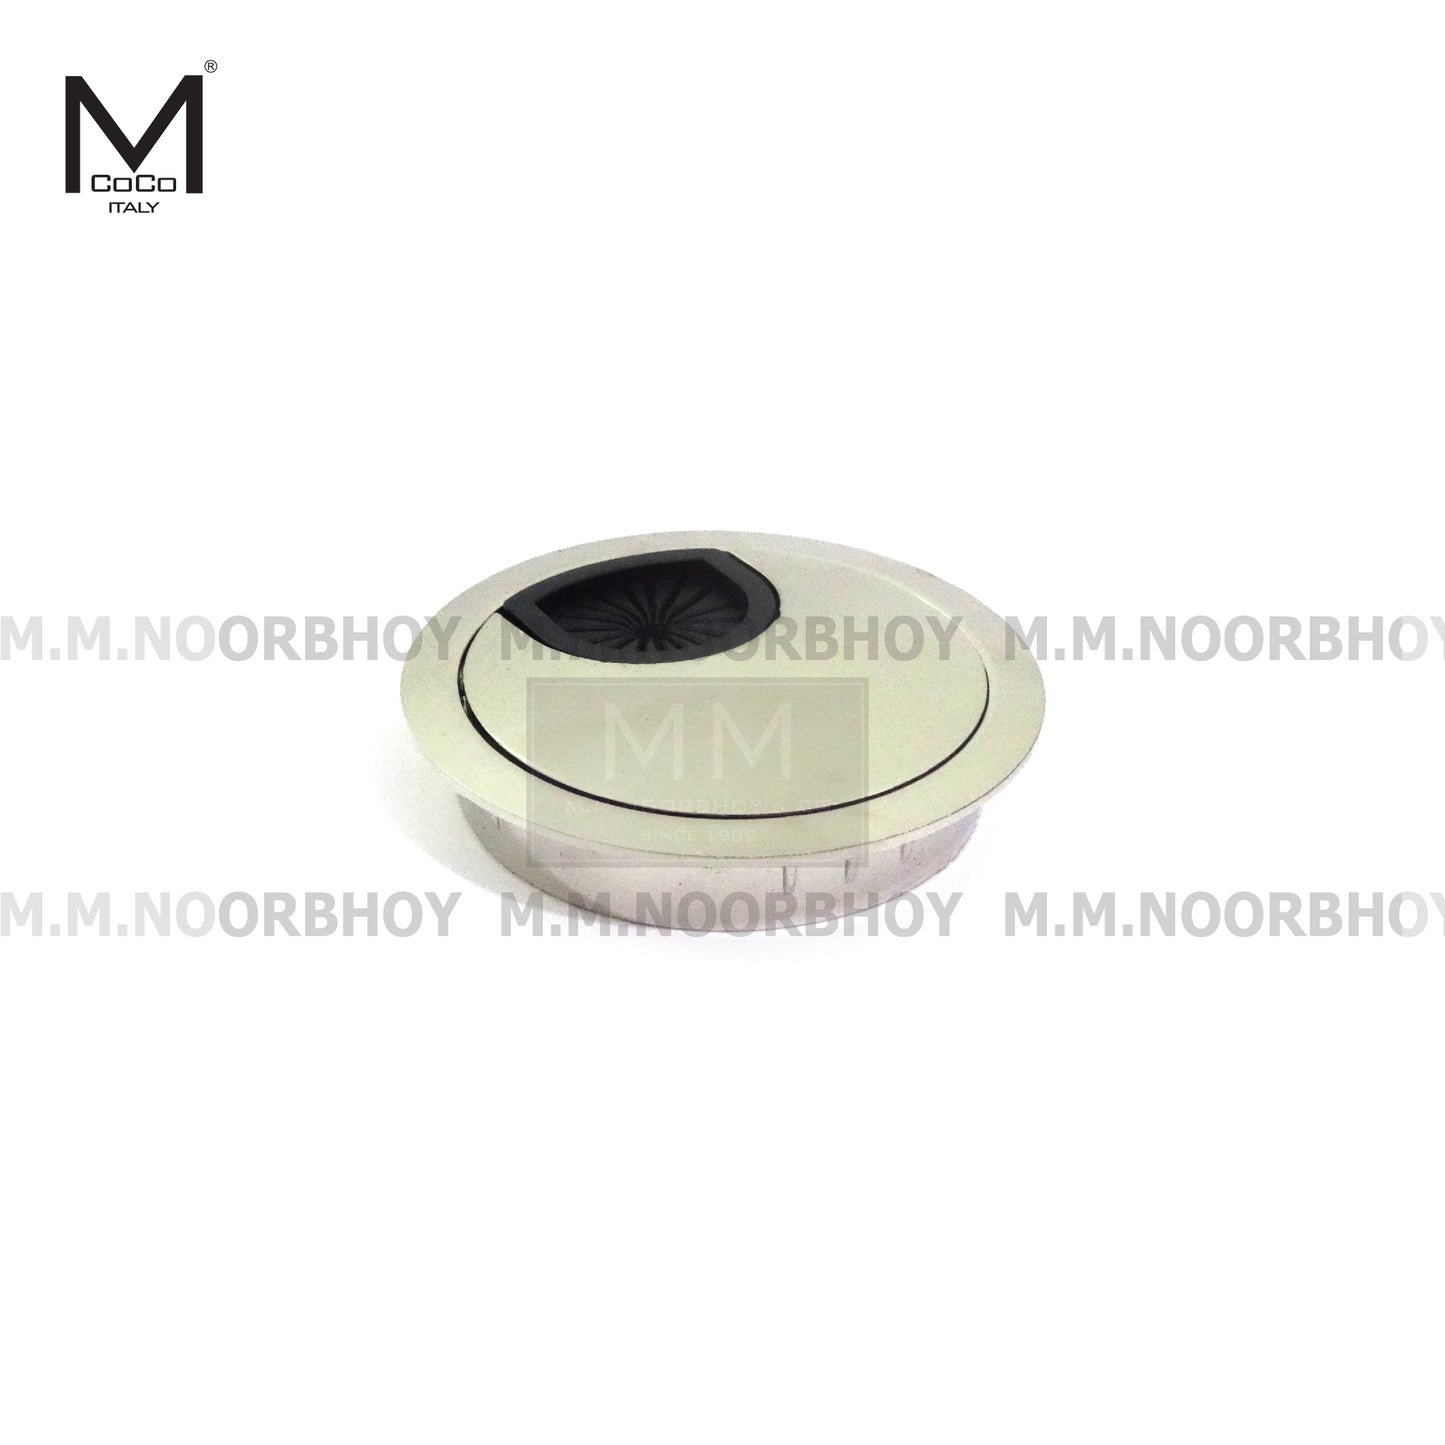 Mcoco Furniture Wire Cap Round Size 55mm Stainless Steel - GK711